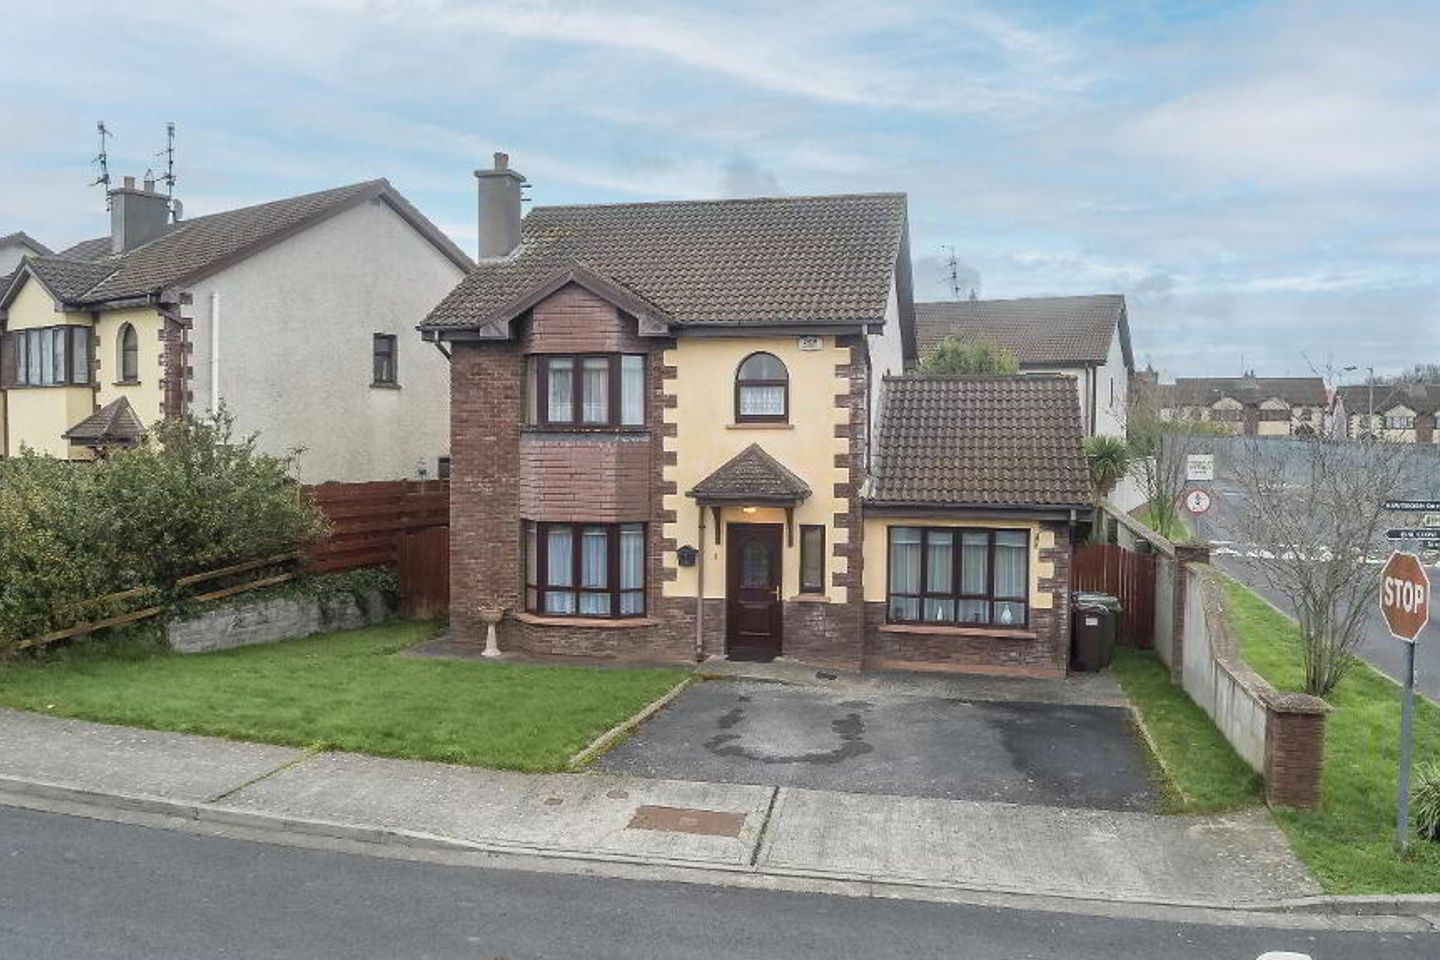 1 Elm Close, Bellfield, Waterford City, Co. Waterford, X91Y05R